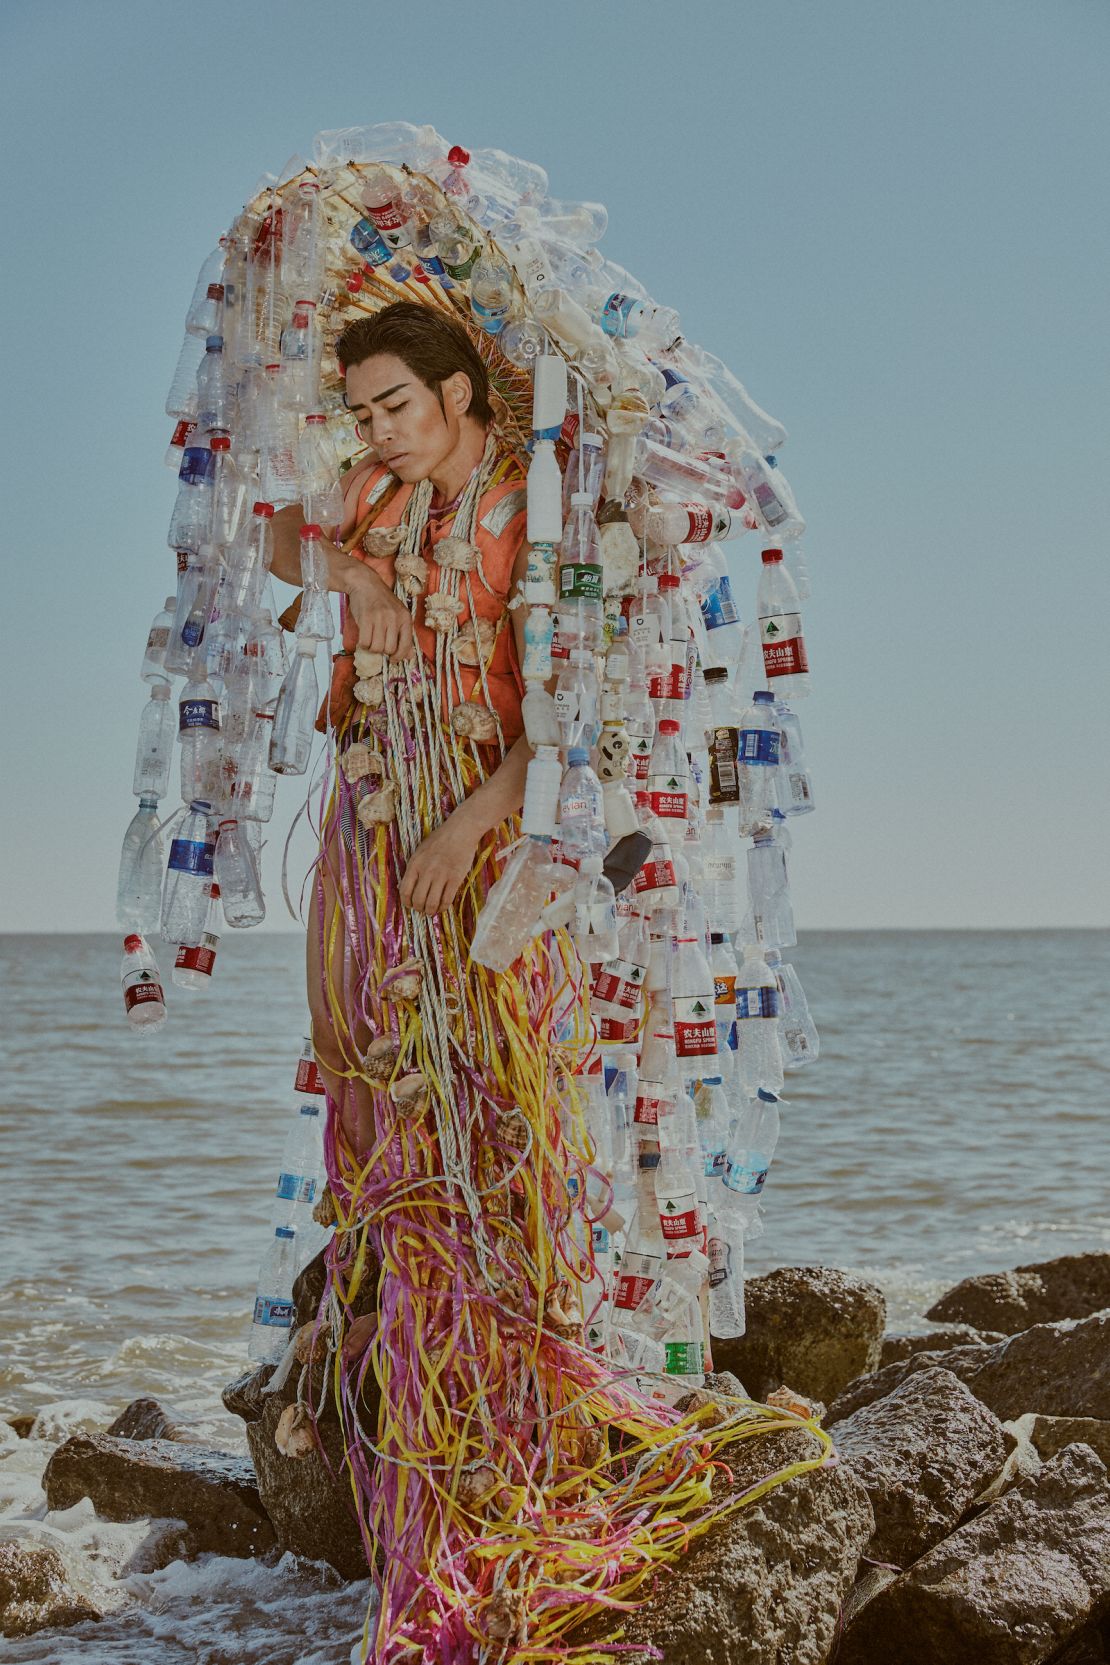 An elaborate outfit made from discarded plastic bottles.